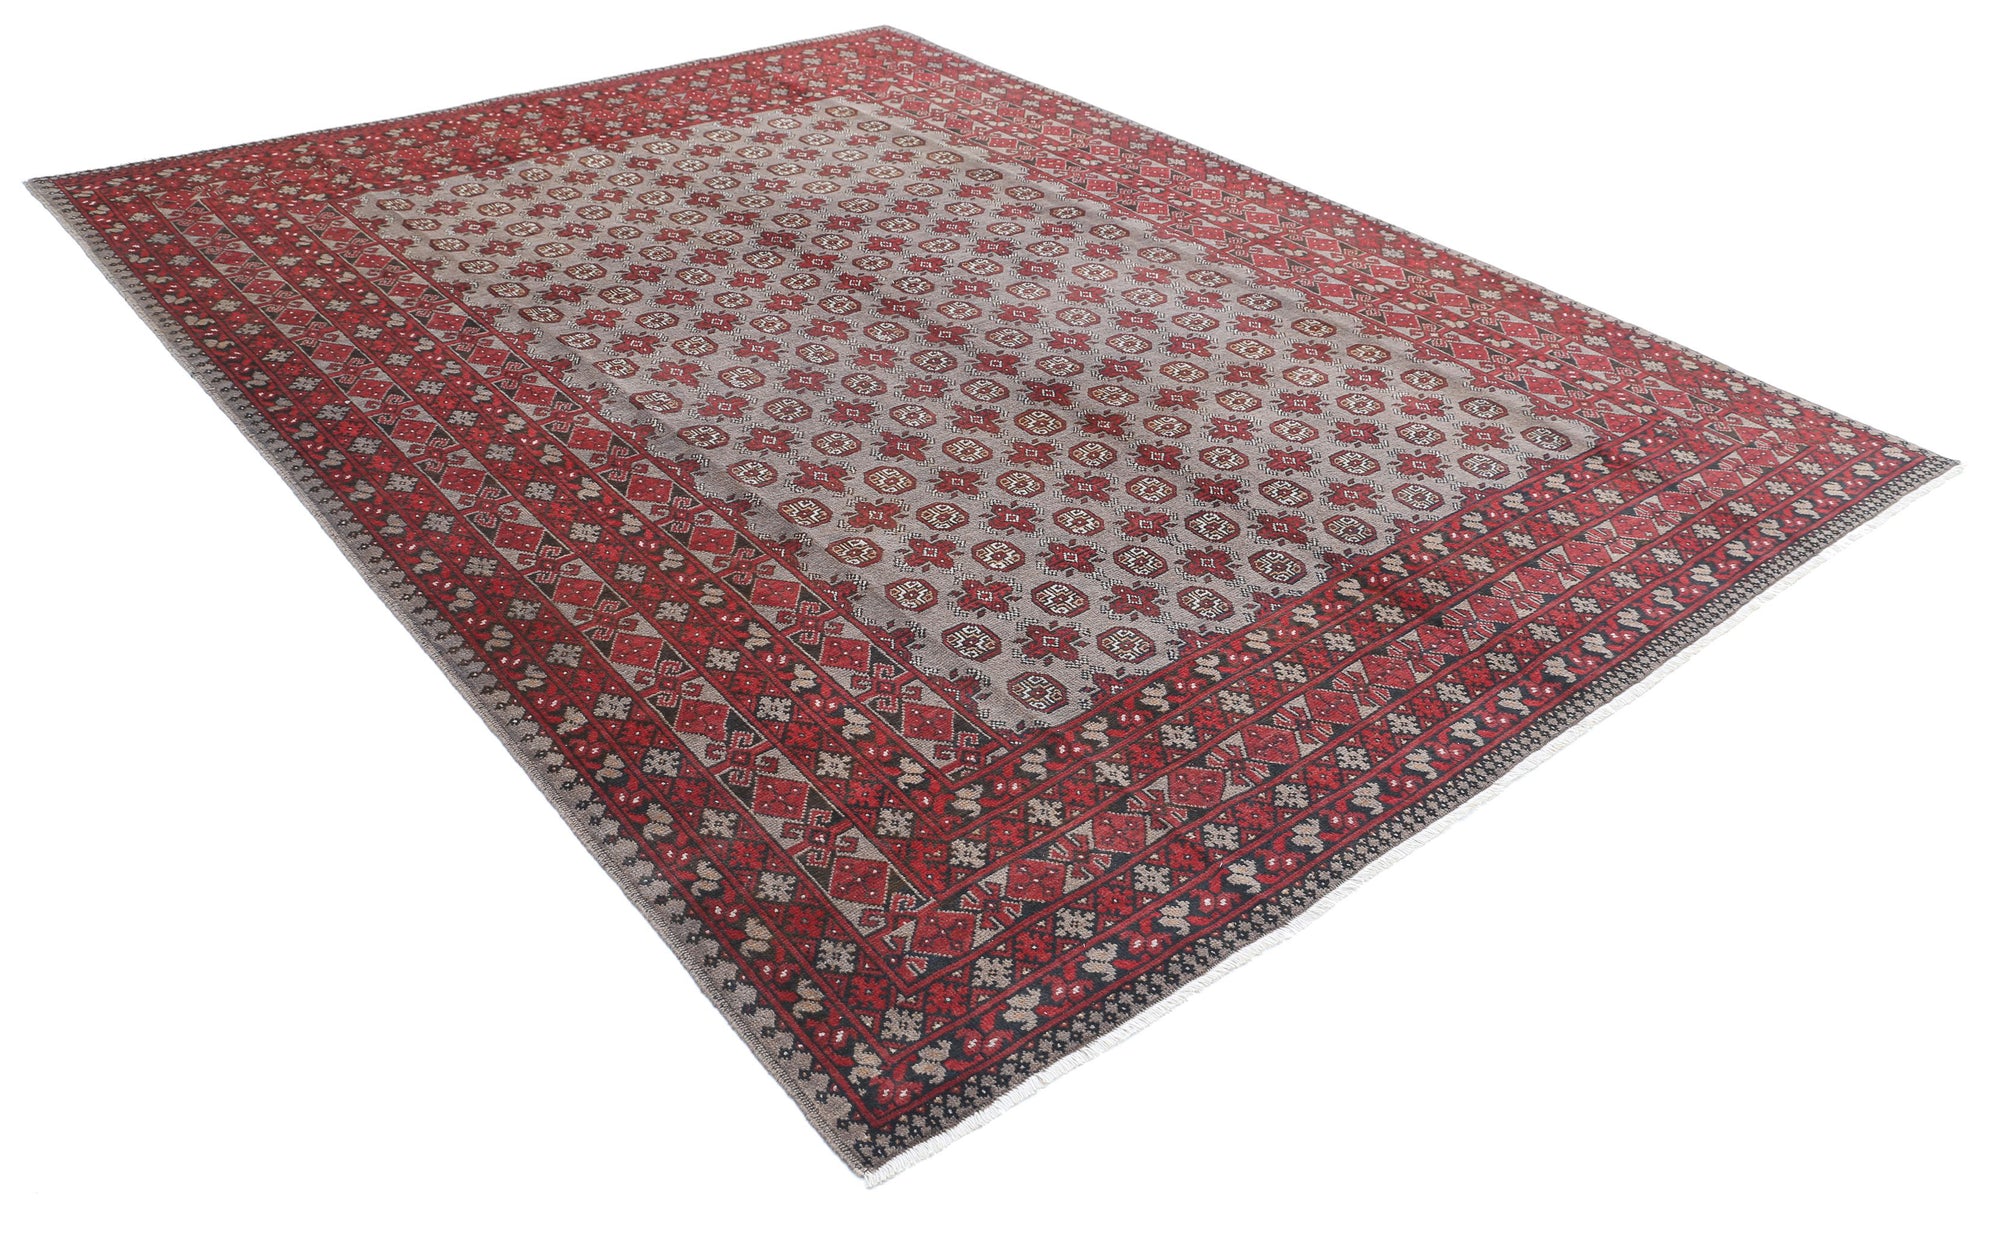 Revival-hand-knotted-gul-collection-wool-rug-5013984-1.jpg